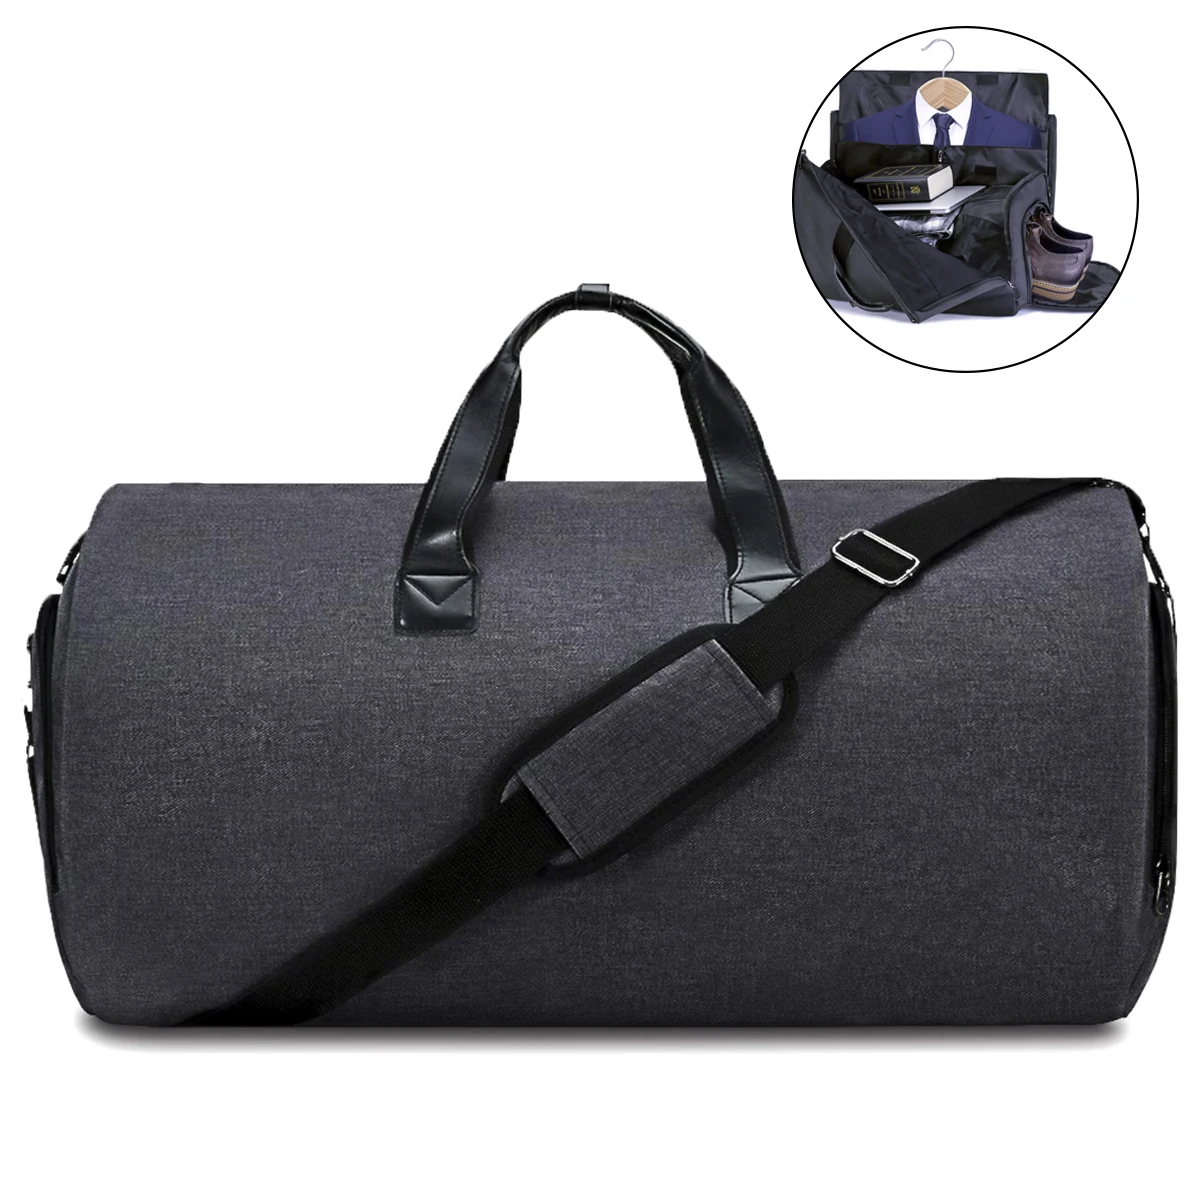 

Convertible Garment Suit Travel Duffel Bag, 2 in 1 Carry On Weekender Garment Bag Overnight Suitcase With Shoes Compartment